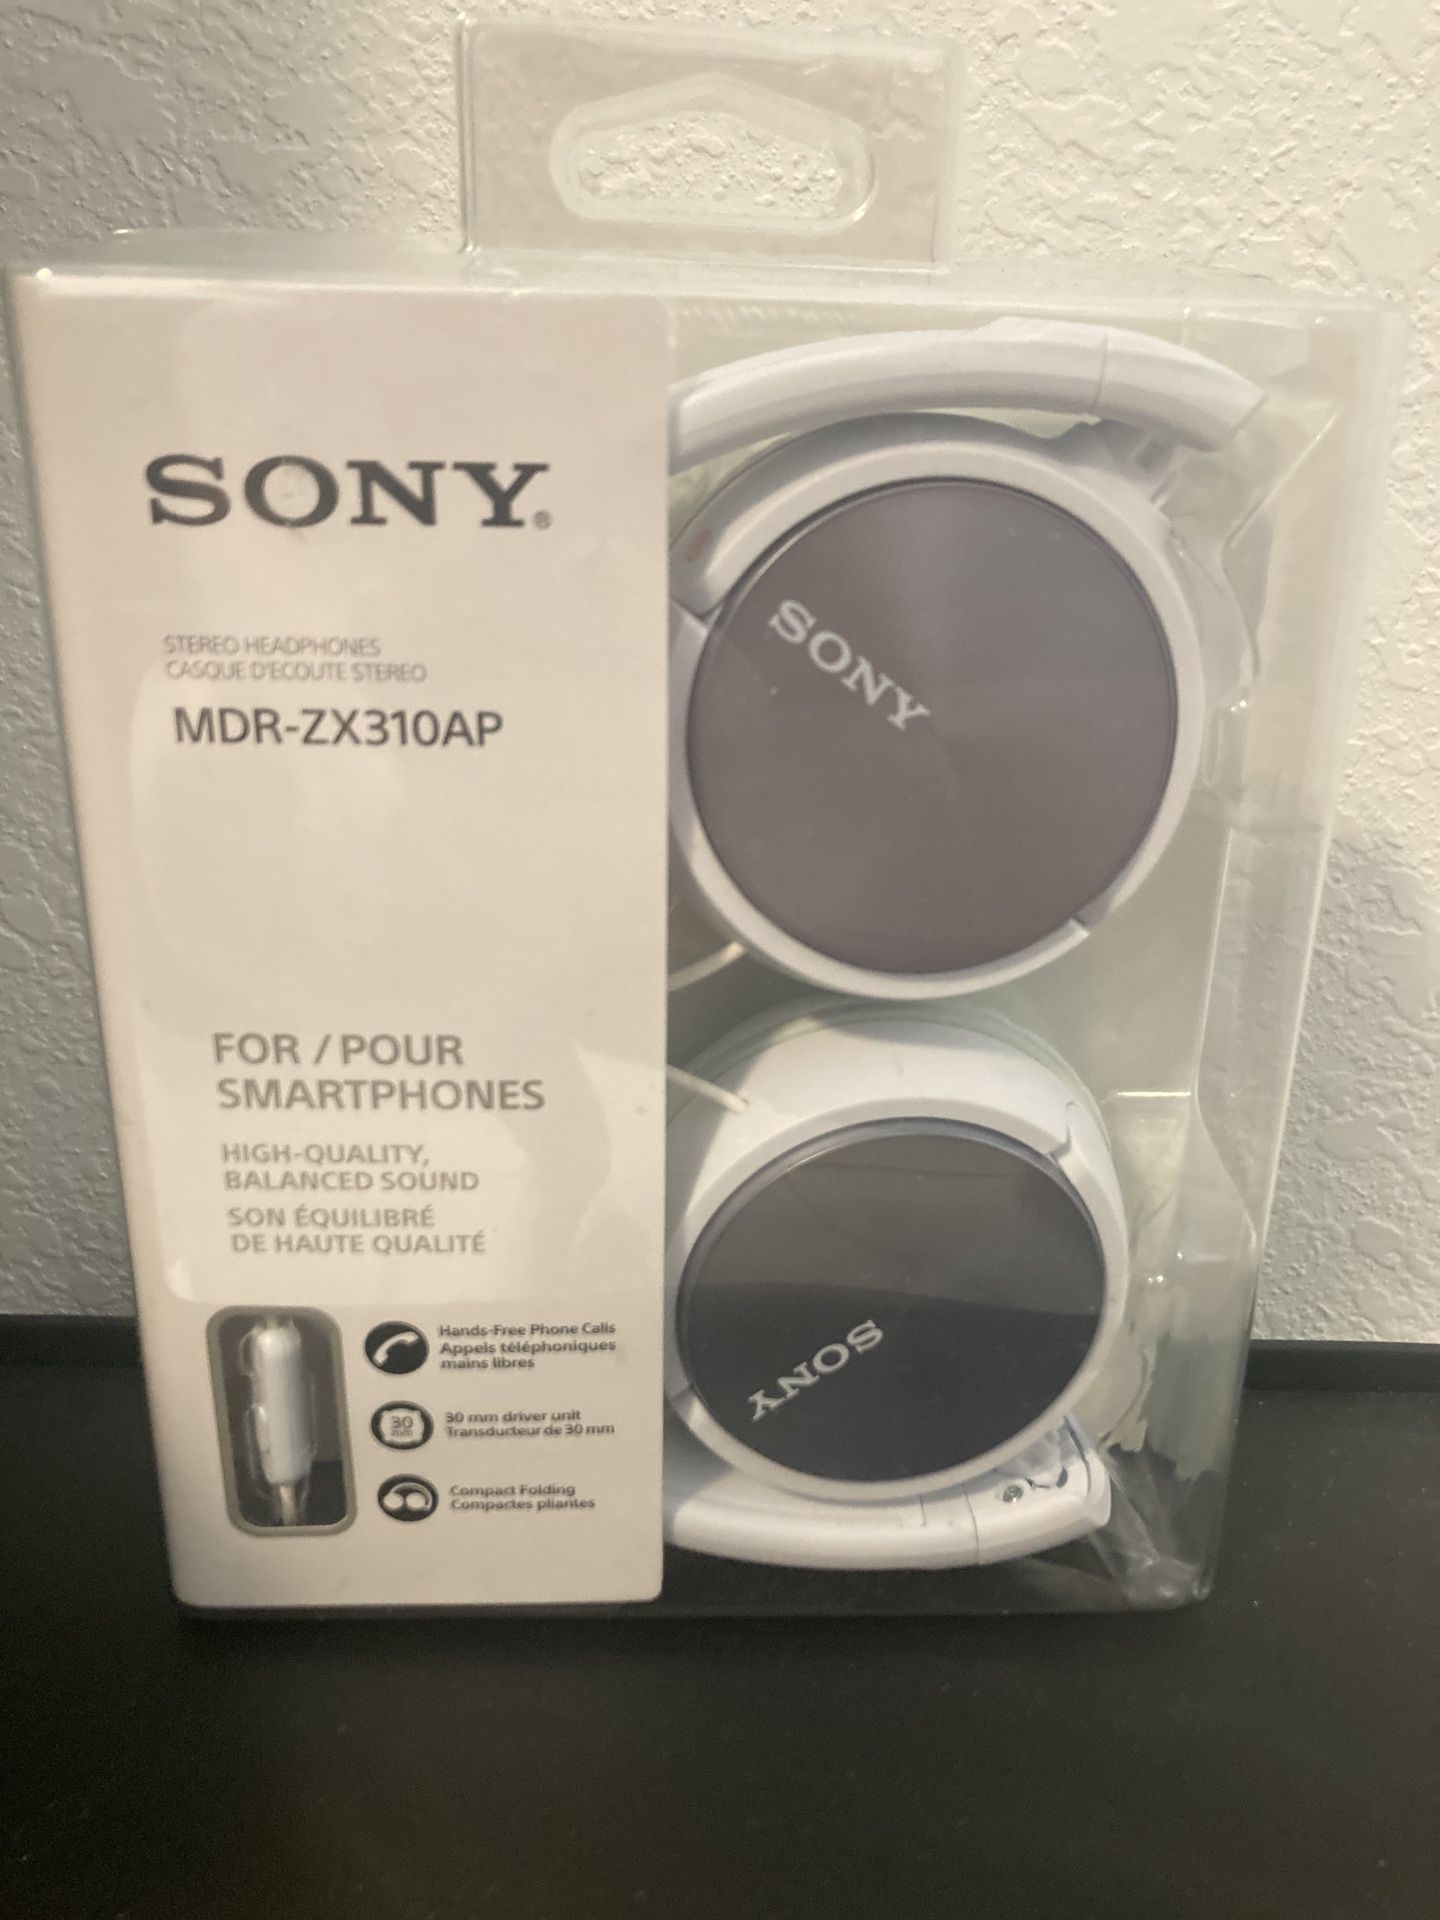 Sony MDR-ZX310AP Headphones (White) - NEW